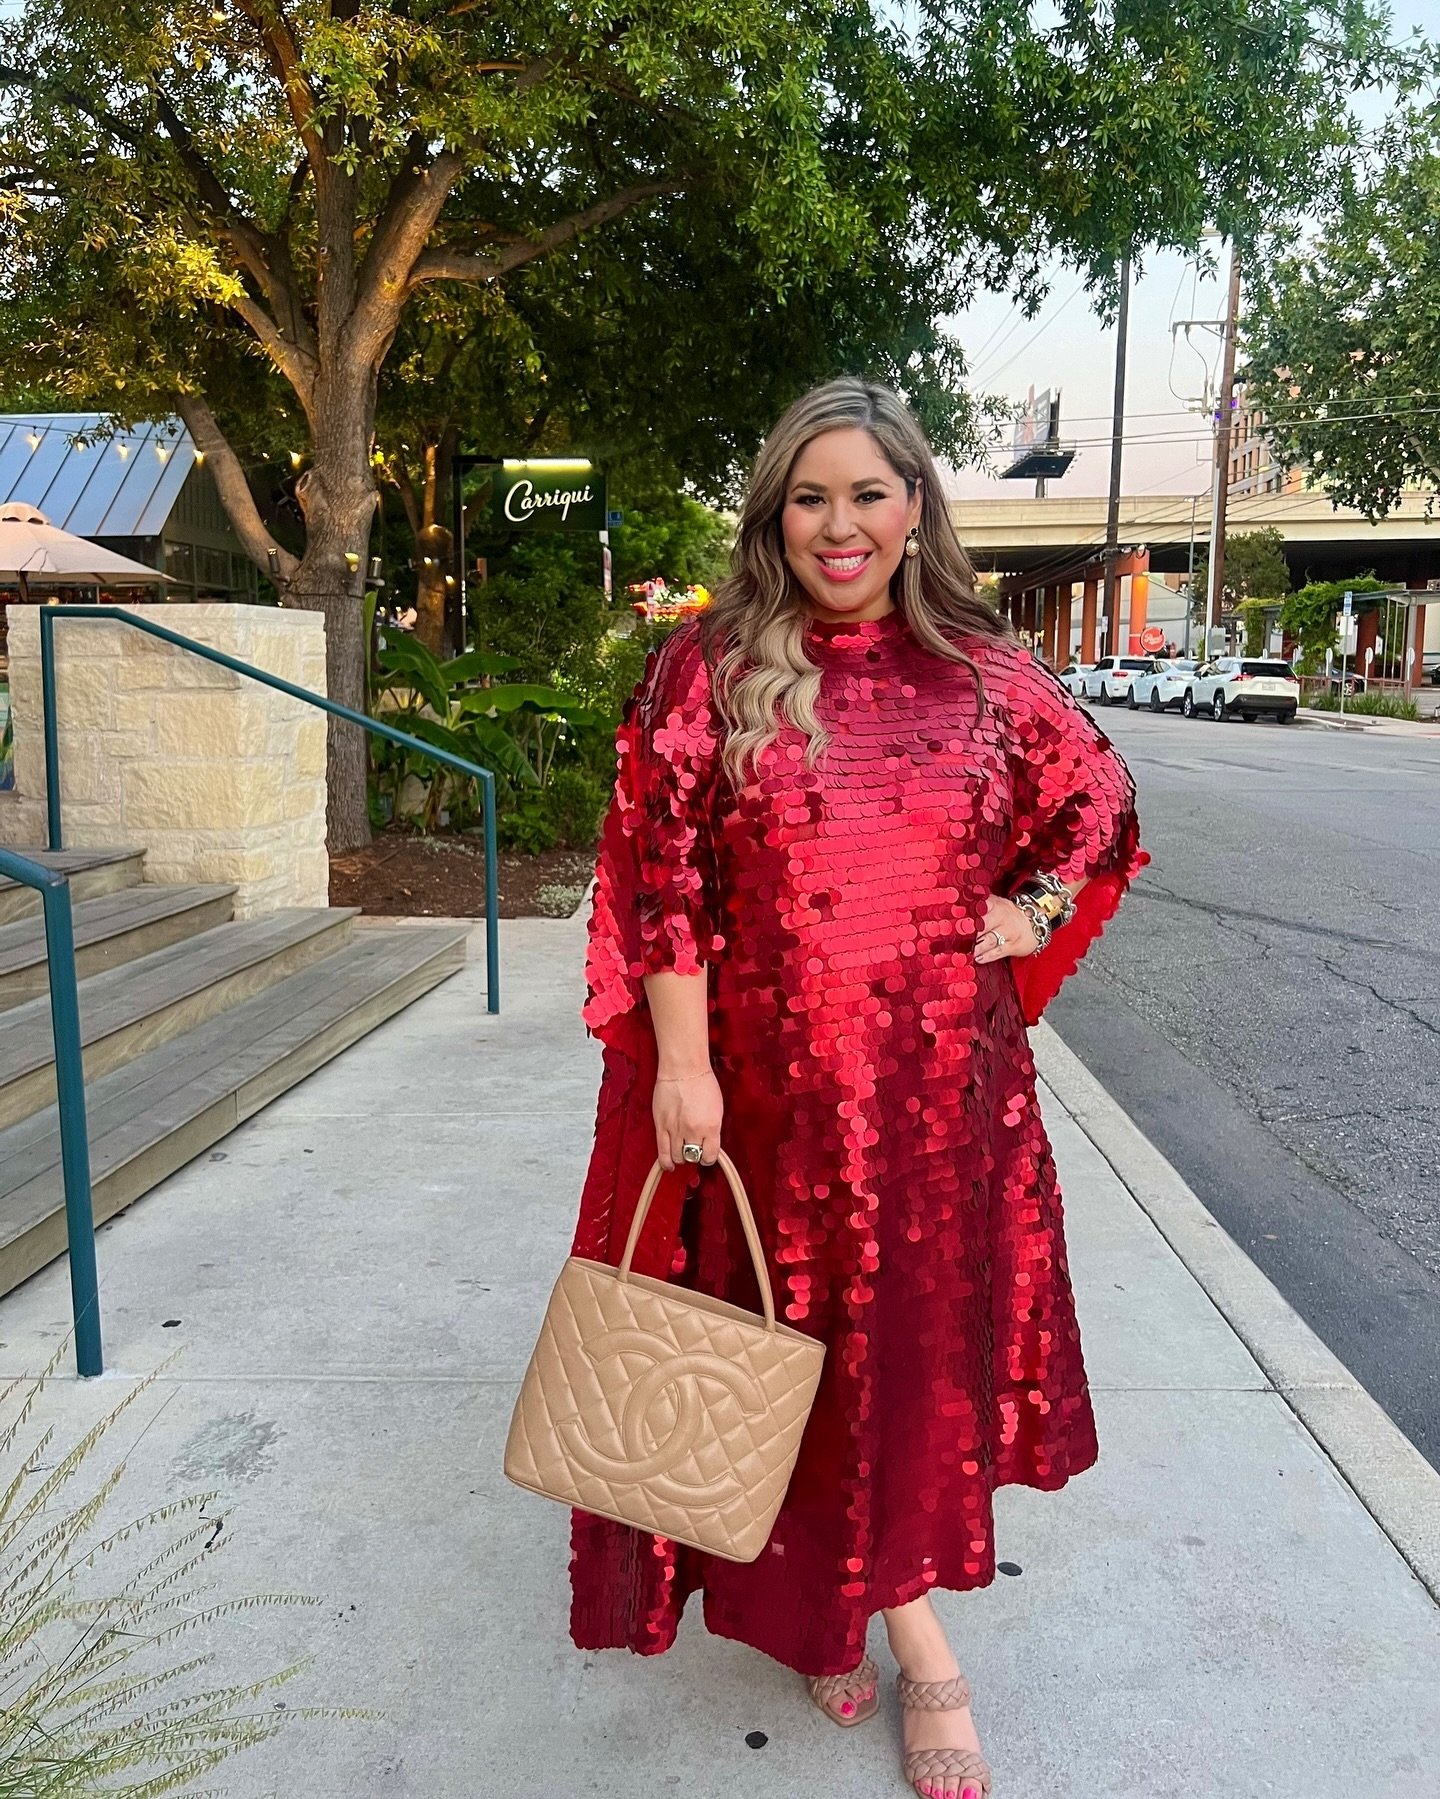 A moment for the dress ❤️ 

Wore this beauty last night 😍 Officially going to start buying more red dresses!

#stylinbrunette #red #reddress #caftan #sequindress #sequincaftan #juniorleague #ootd #chanel #reddressinspo